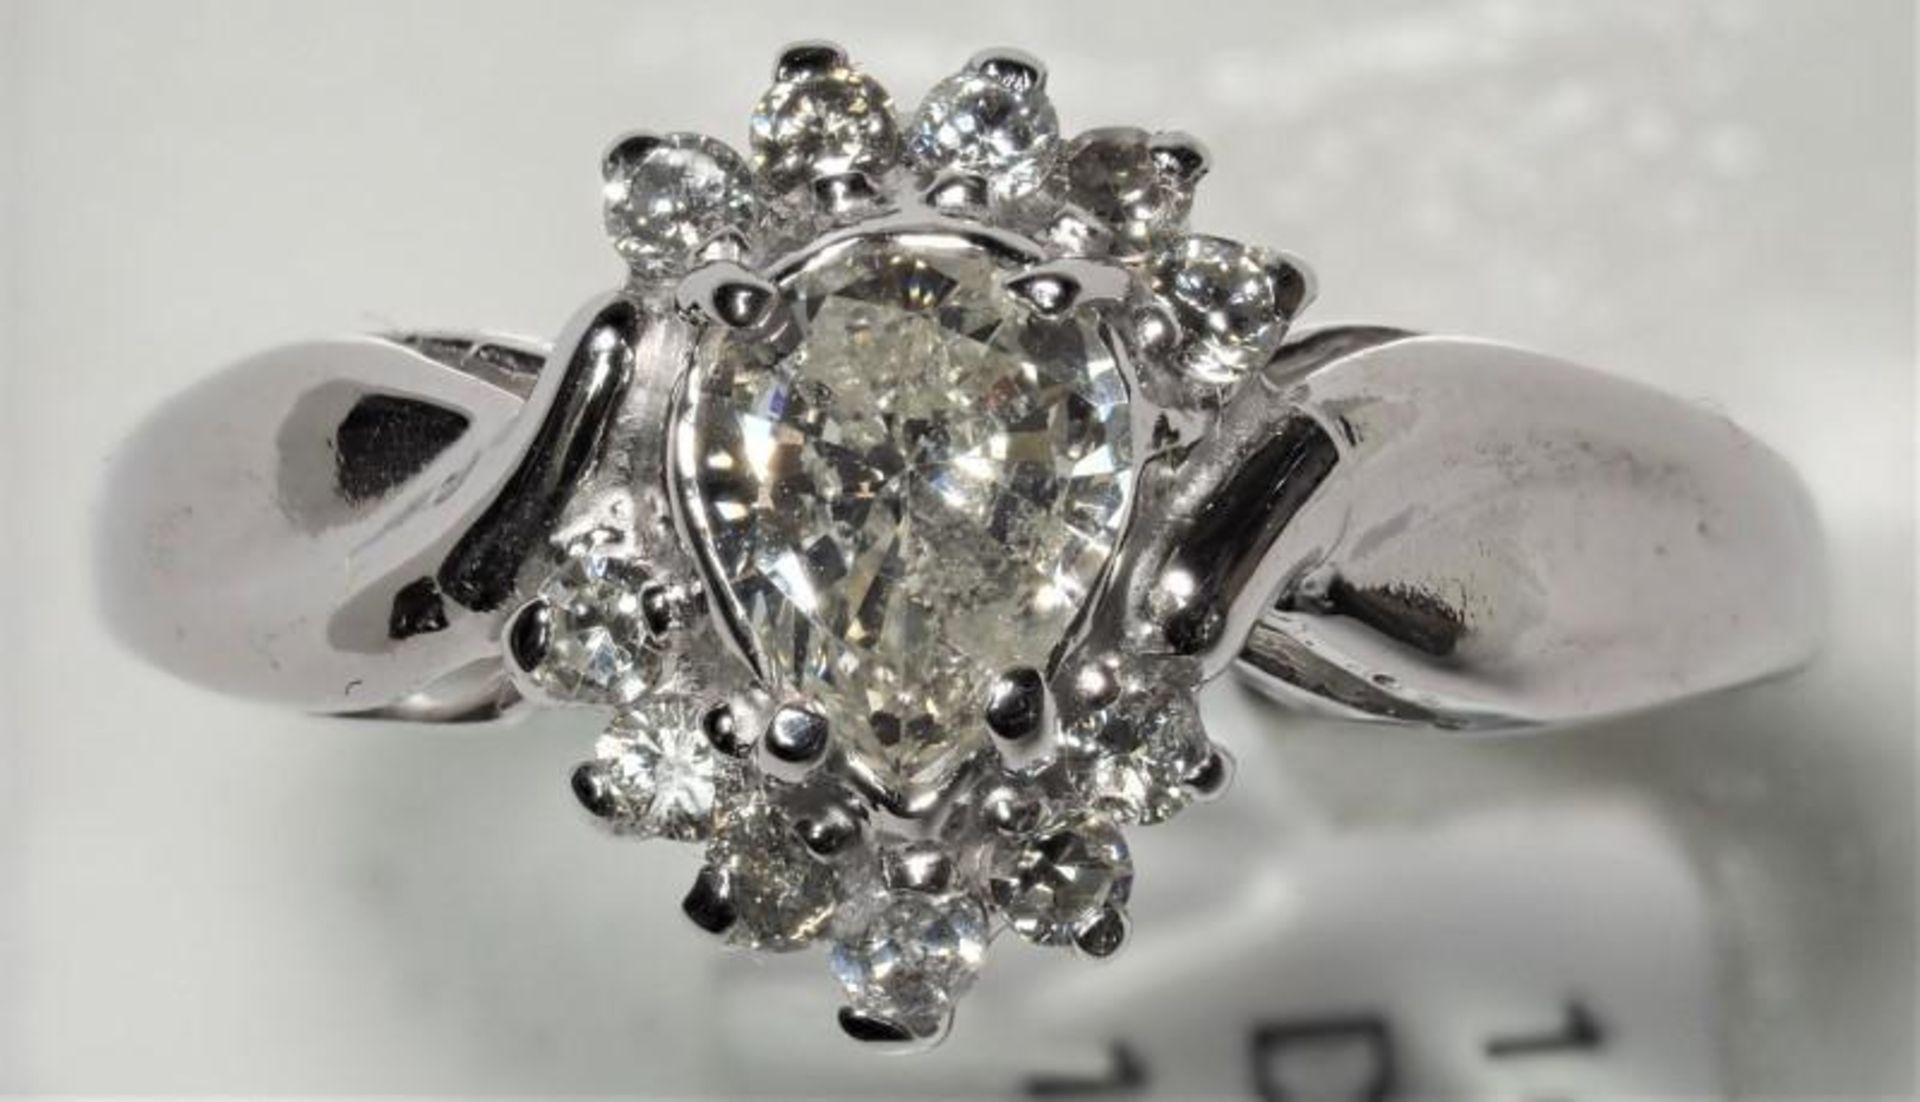 10K White Gold Pear Diamond (0.44ct, April Birthstone) with 11 Accompanying Diamonds (0.11ct) Ring. - Image 2 of 4